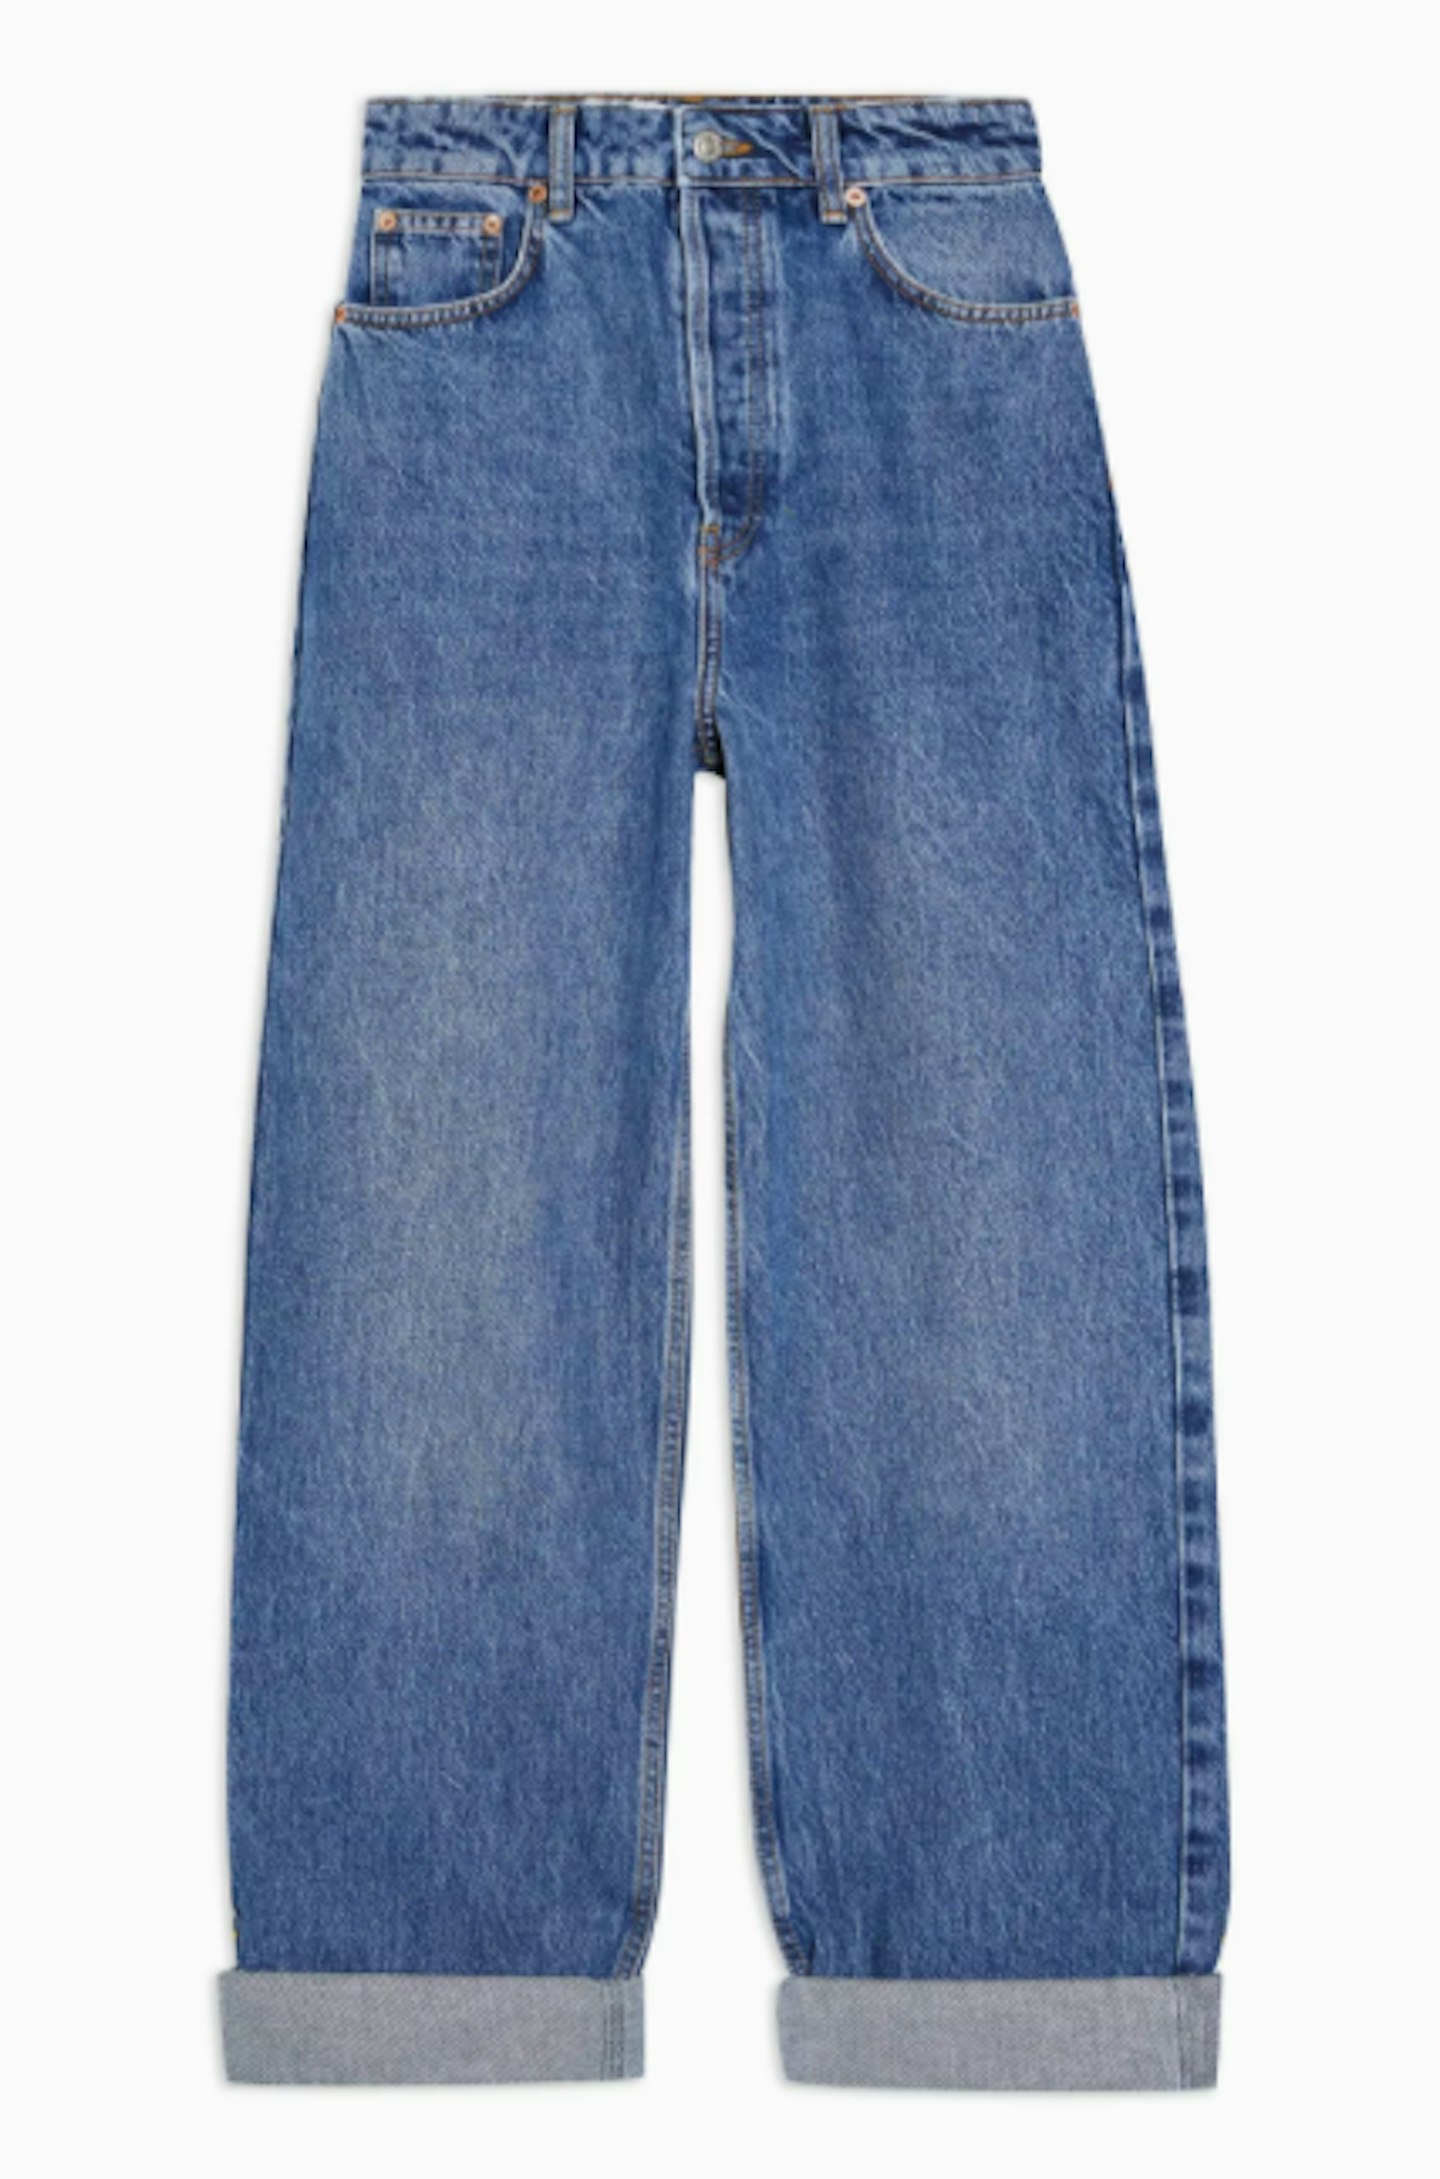 Topshop, Oversized Mom Tapered Jeans, £29.99